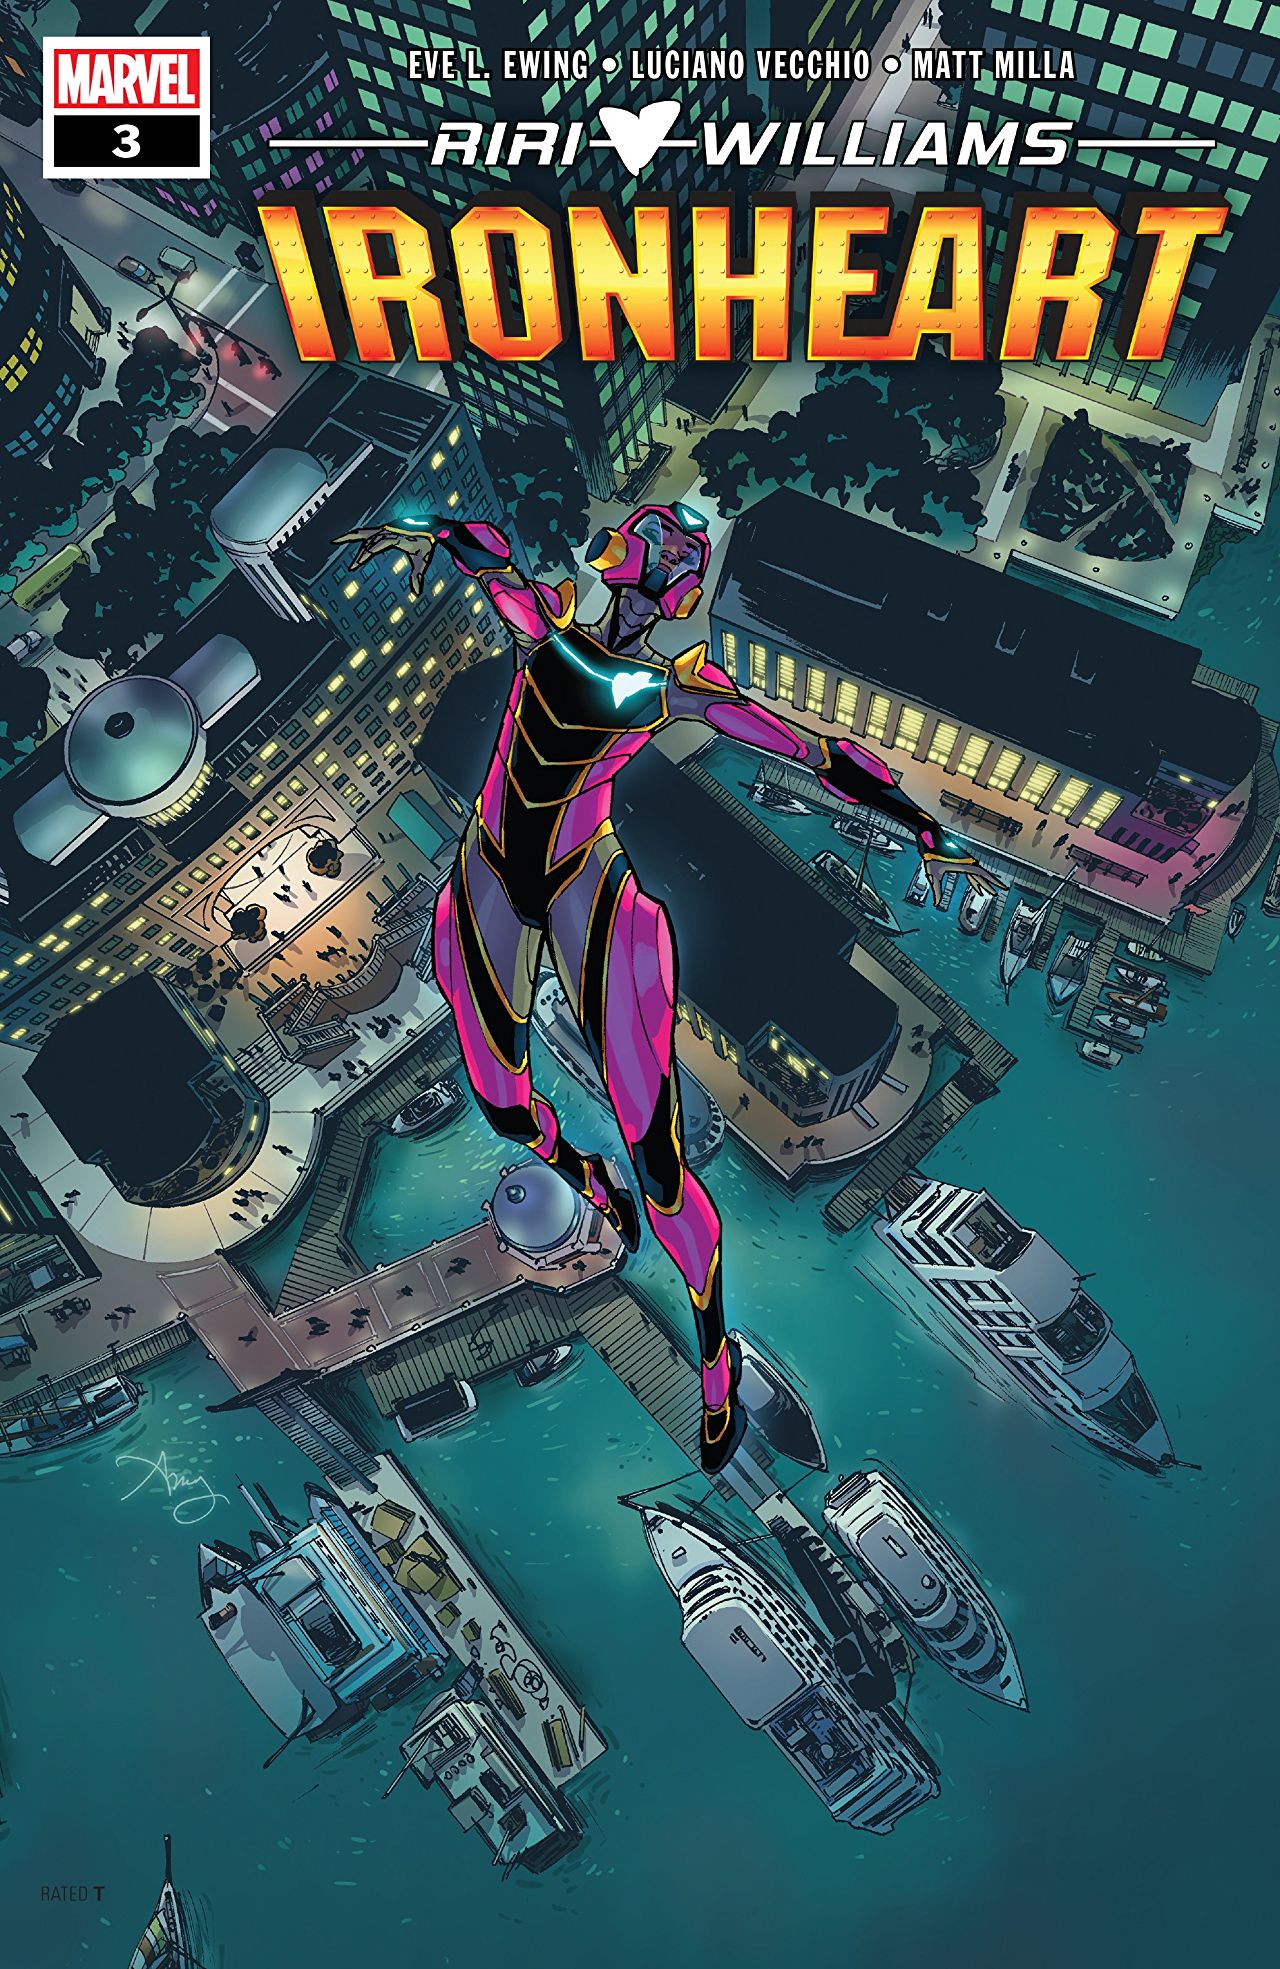 Ironheart #3. Cover by Amy Reeder.